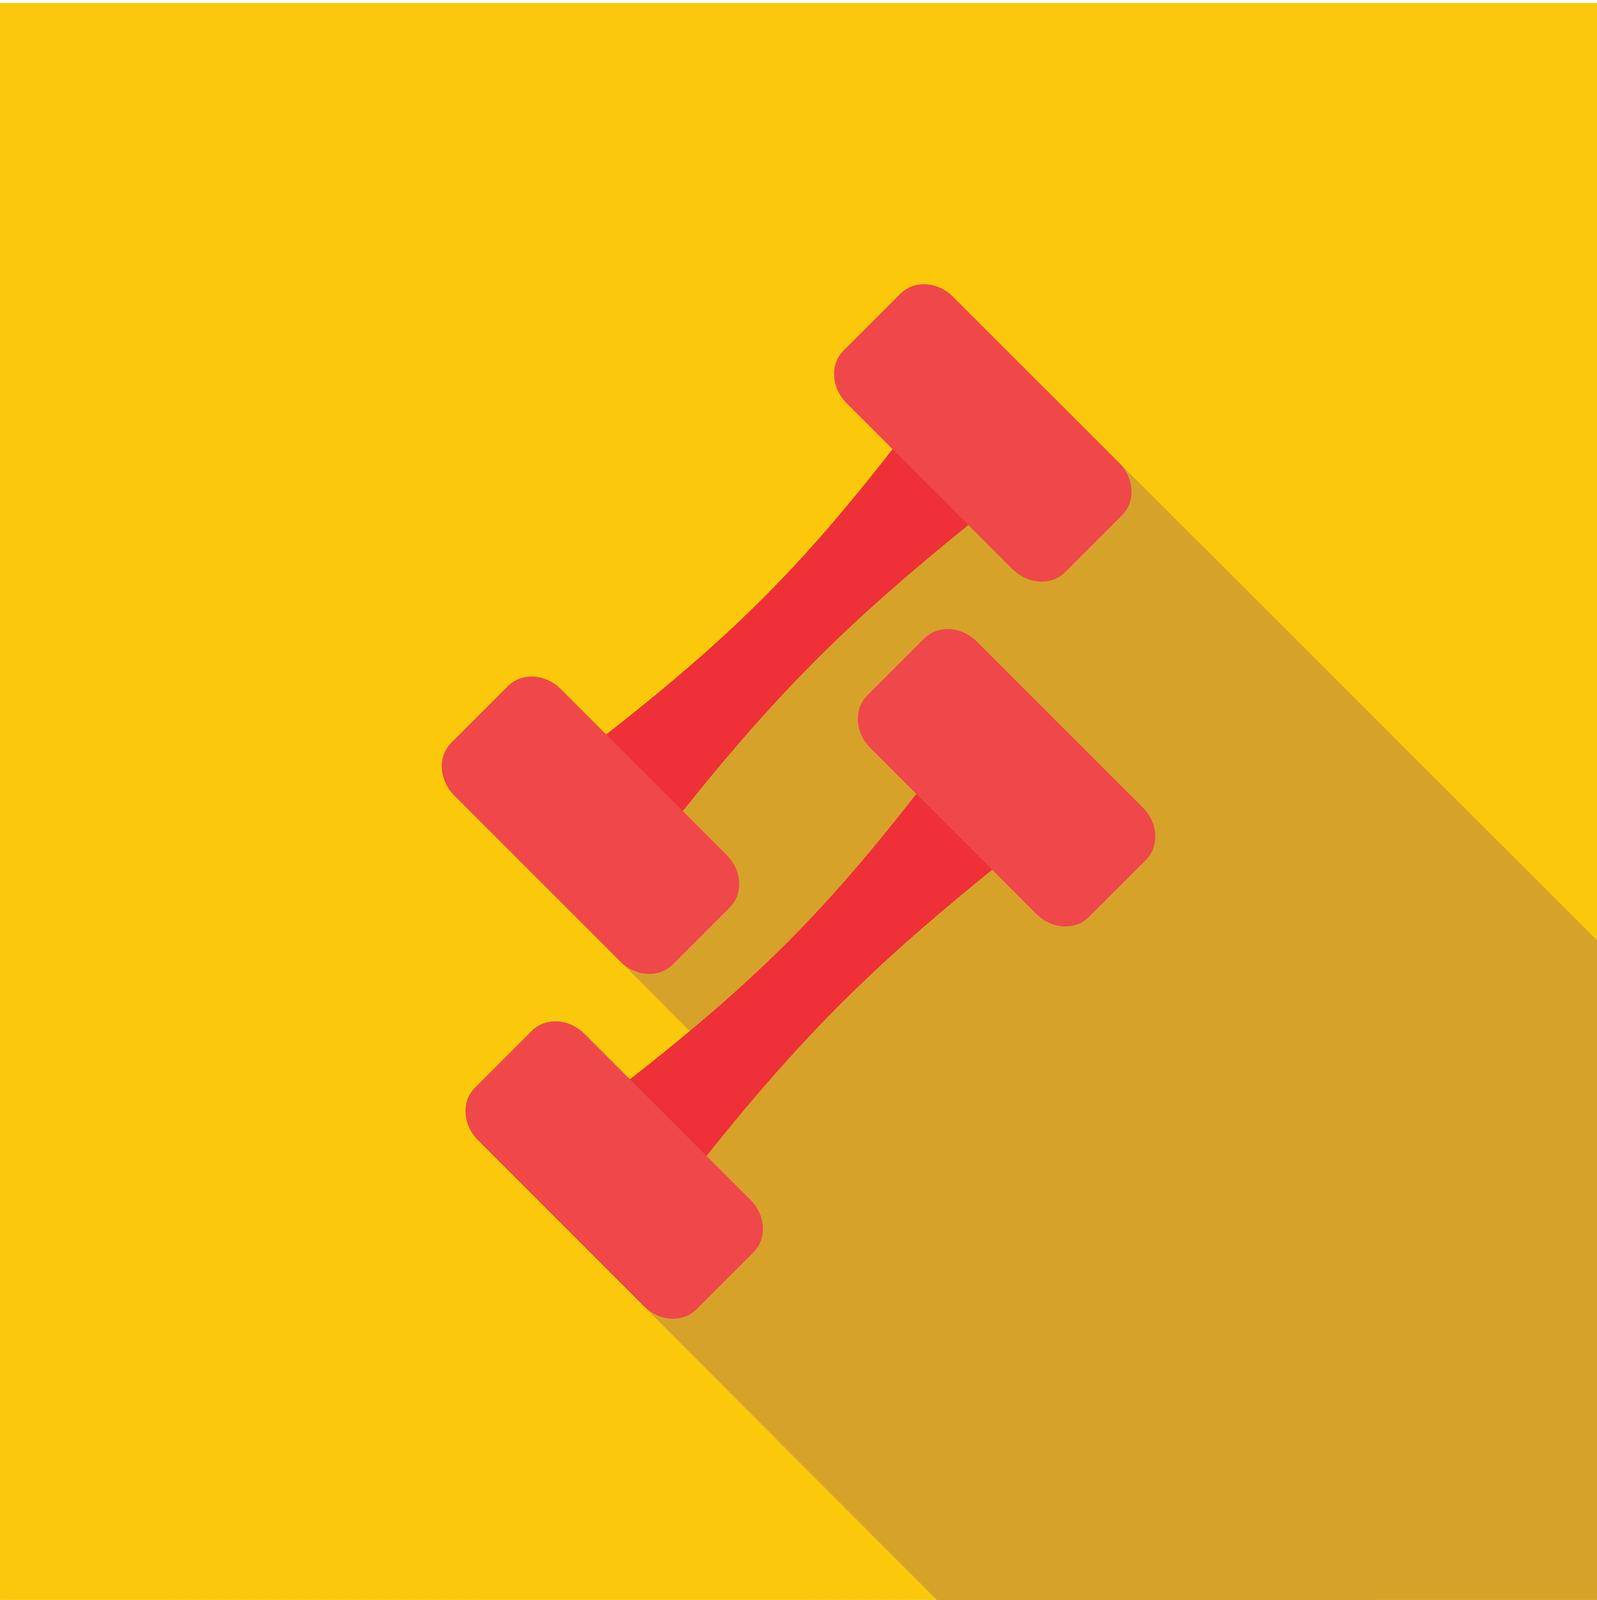 Pair of dumbbells icon in flat style on a yellow background